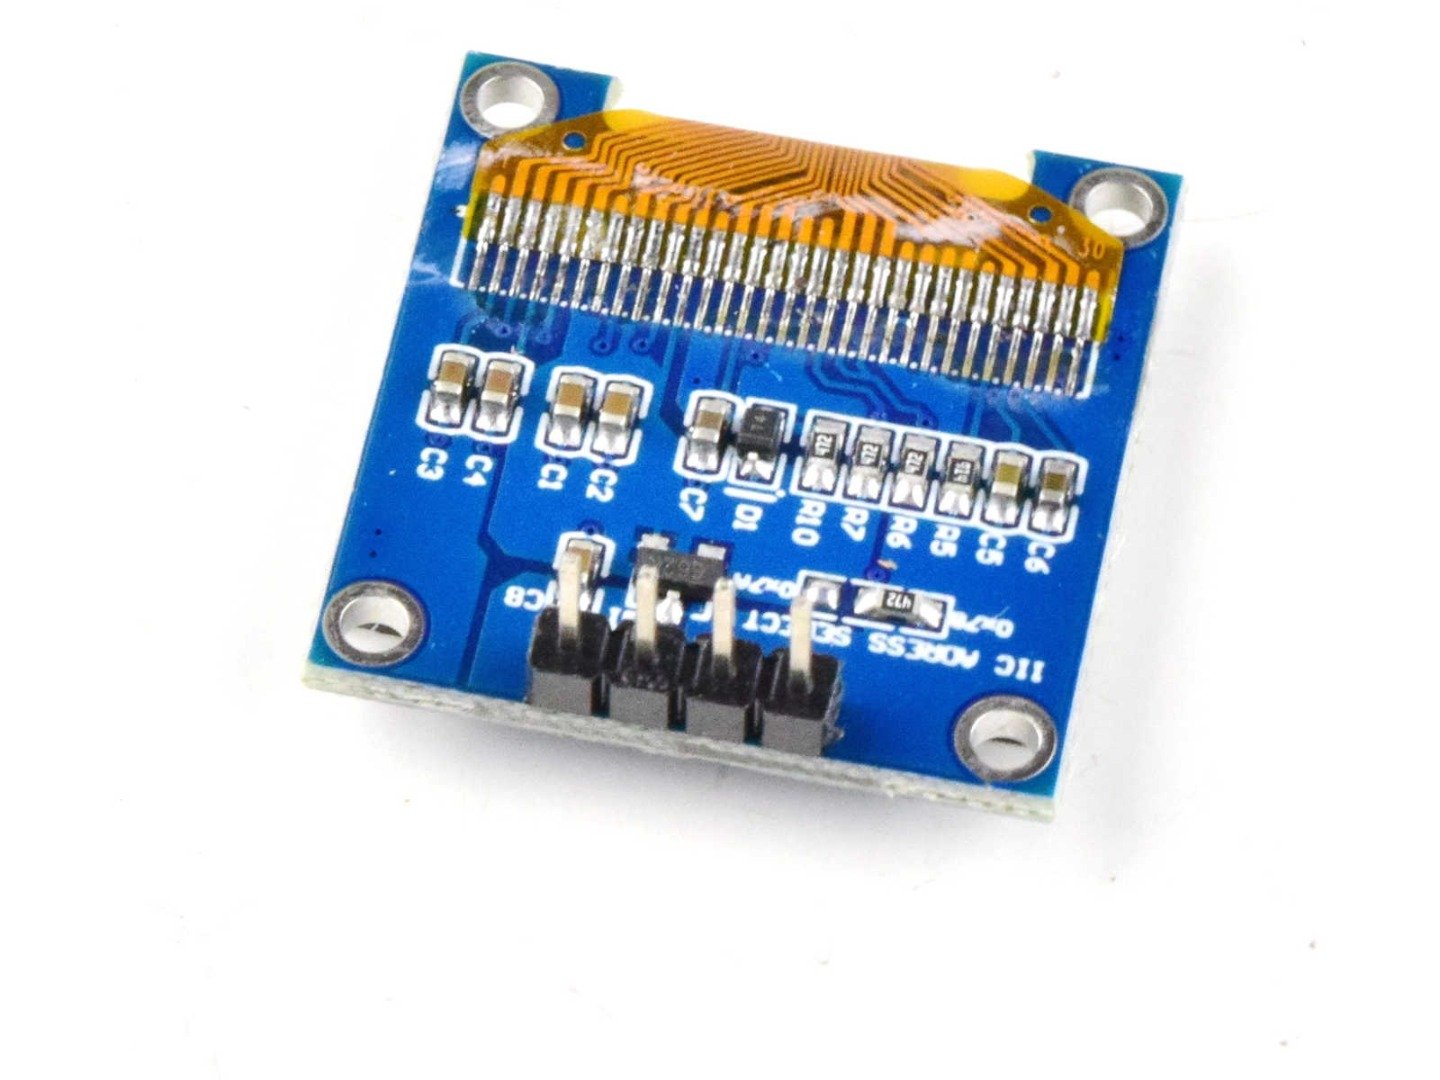 OLED 128×64 Pixel, I2C, 0.96 inch, SSD1306 SH1106, 3-5V (100% compatible with Arduino) 6